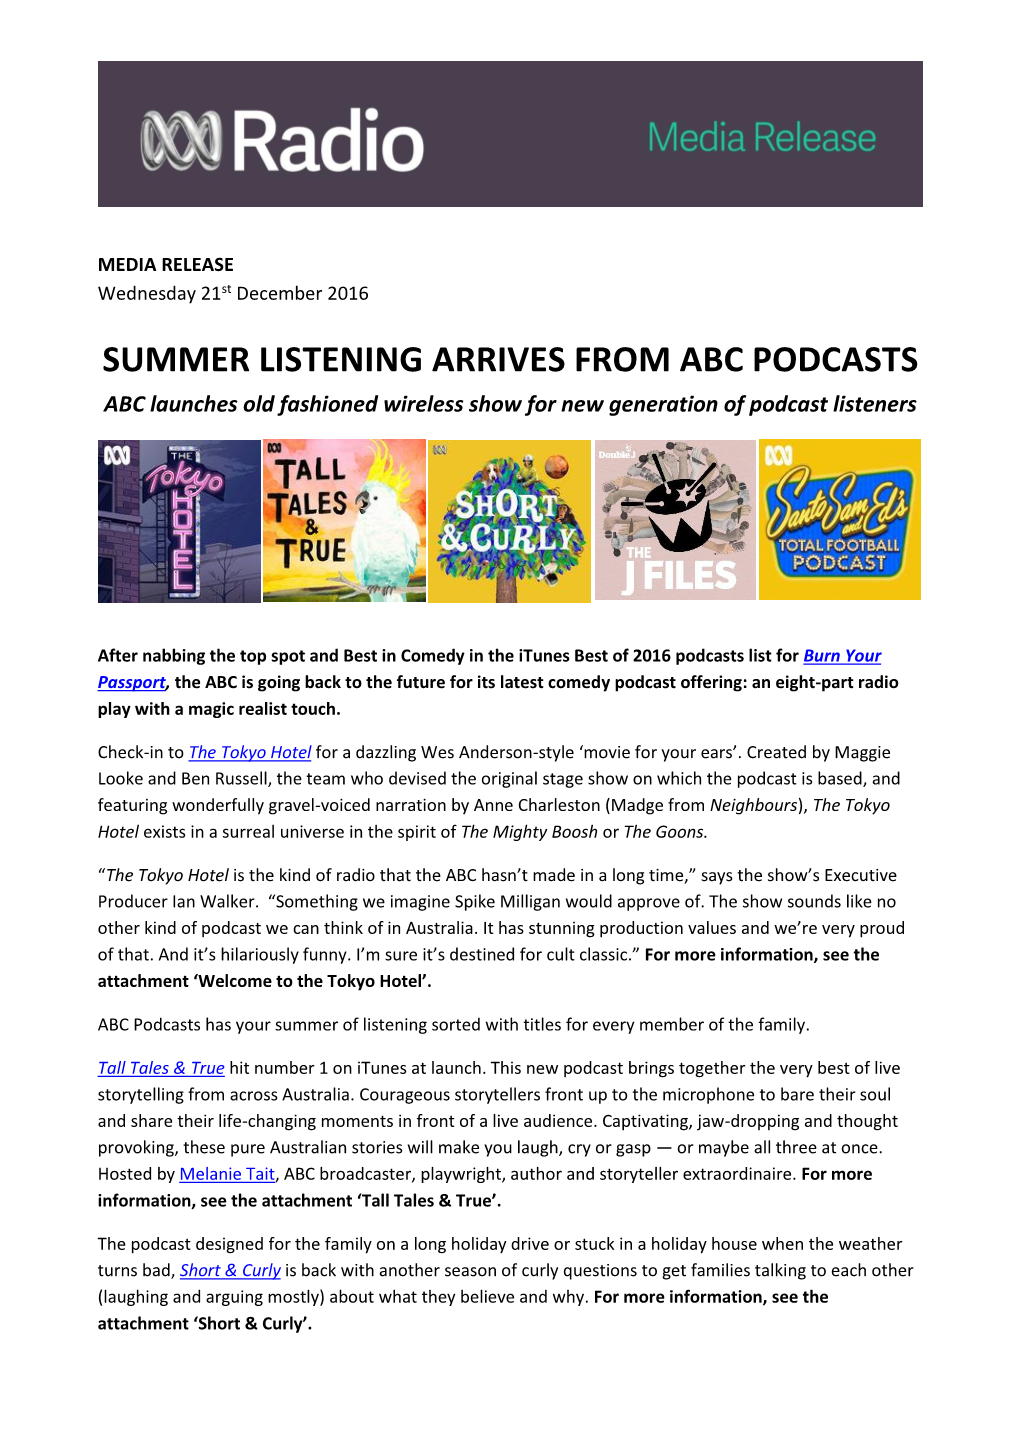 SUMMER LISTENING ARRIVES from ABC PODCASTS ABC Launches Old Fashioned Wireless Show for New Generation of Podcast Listeners